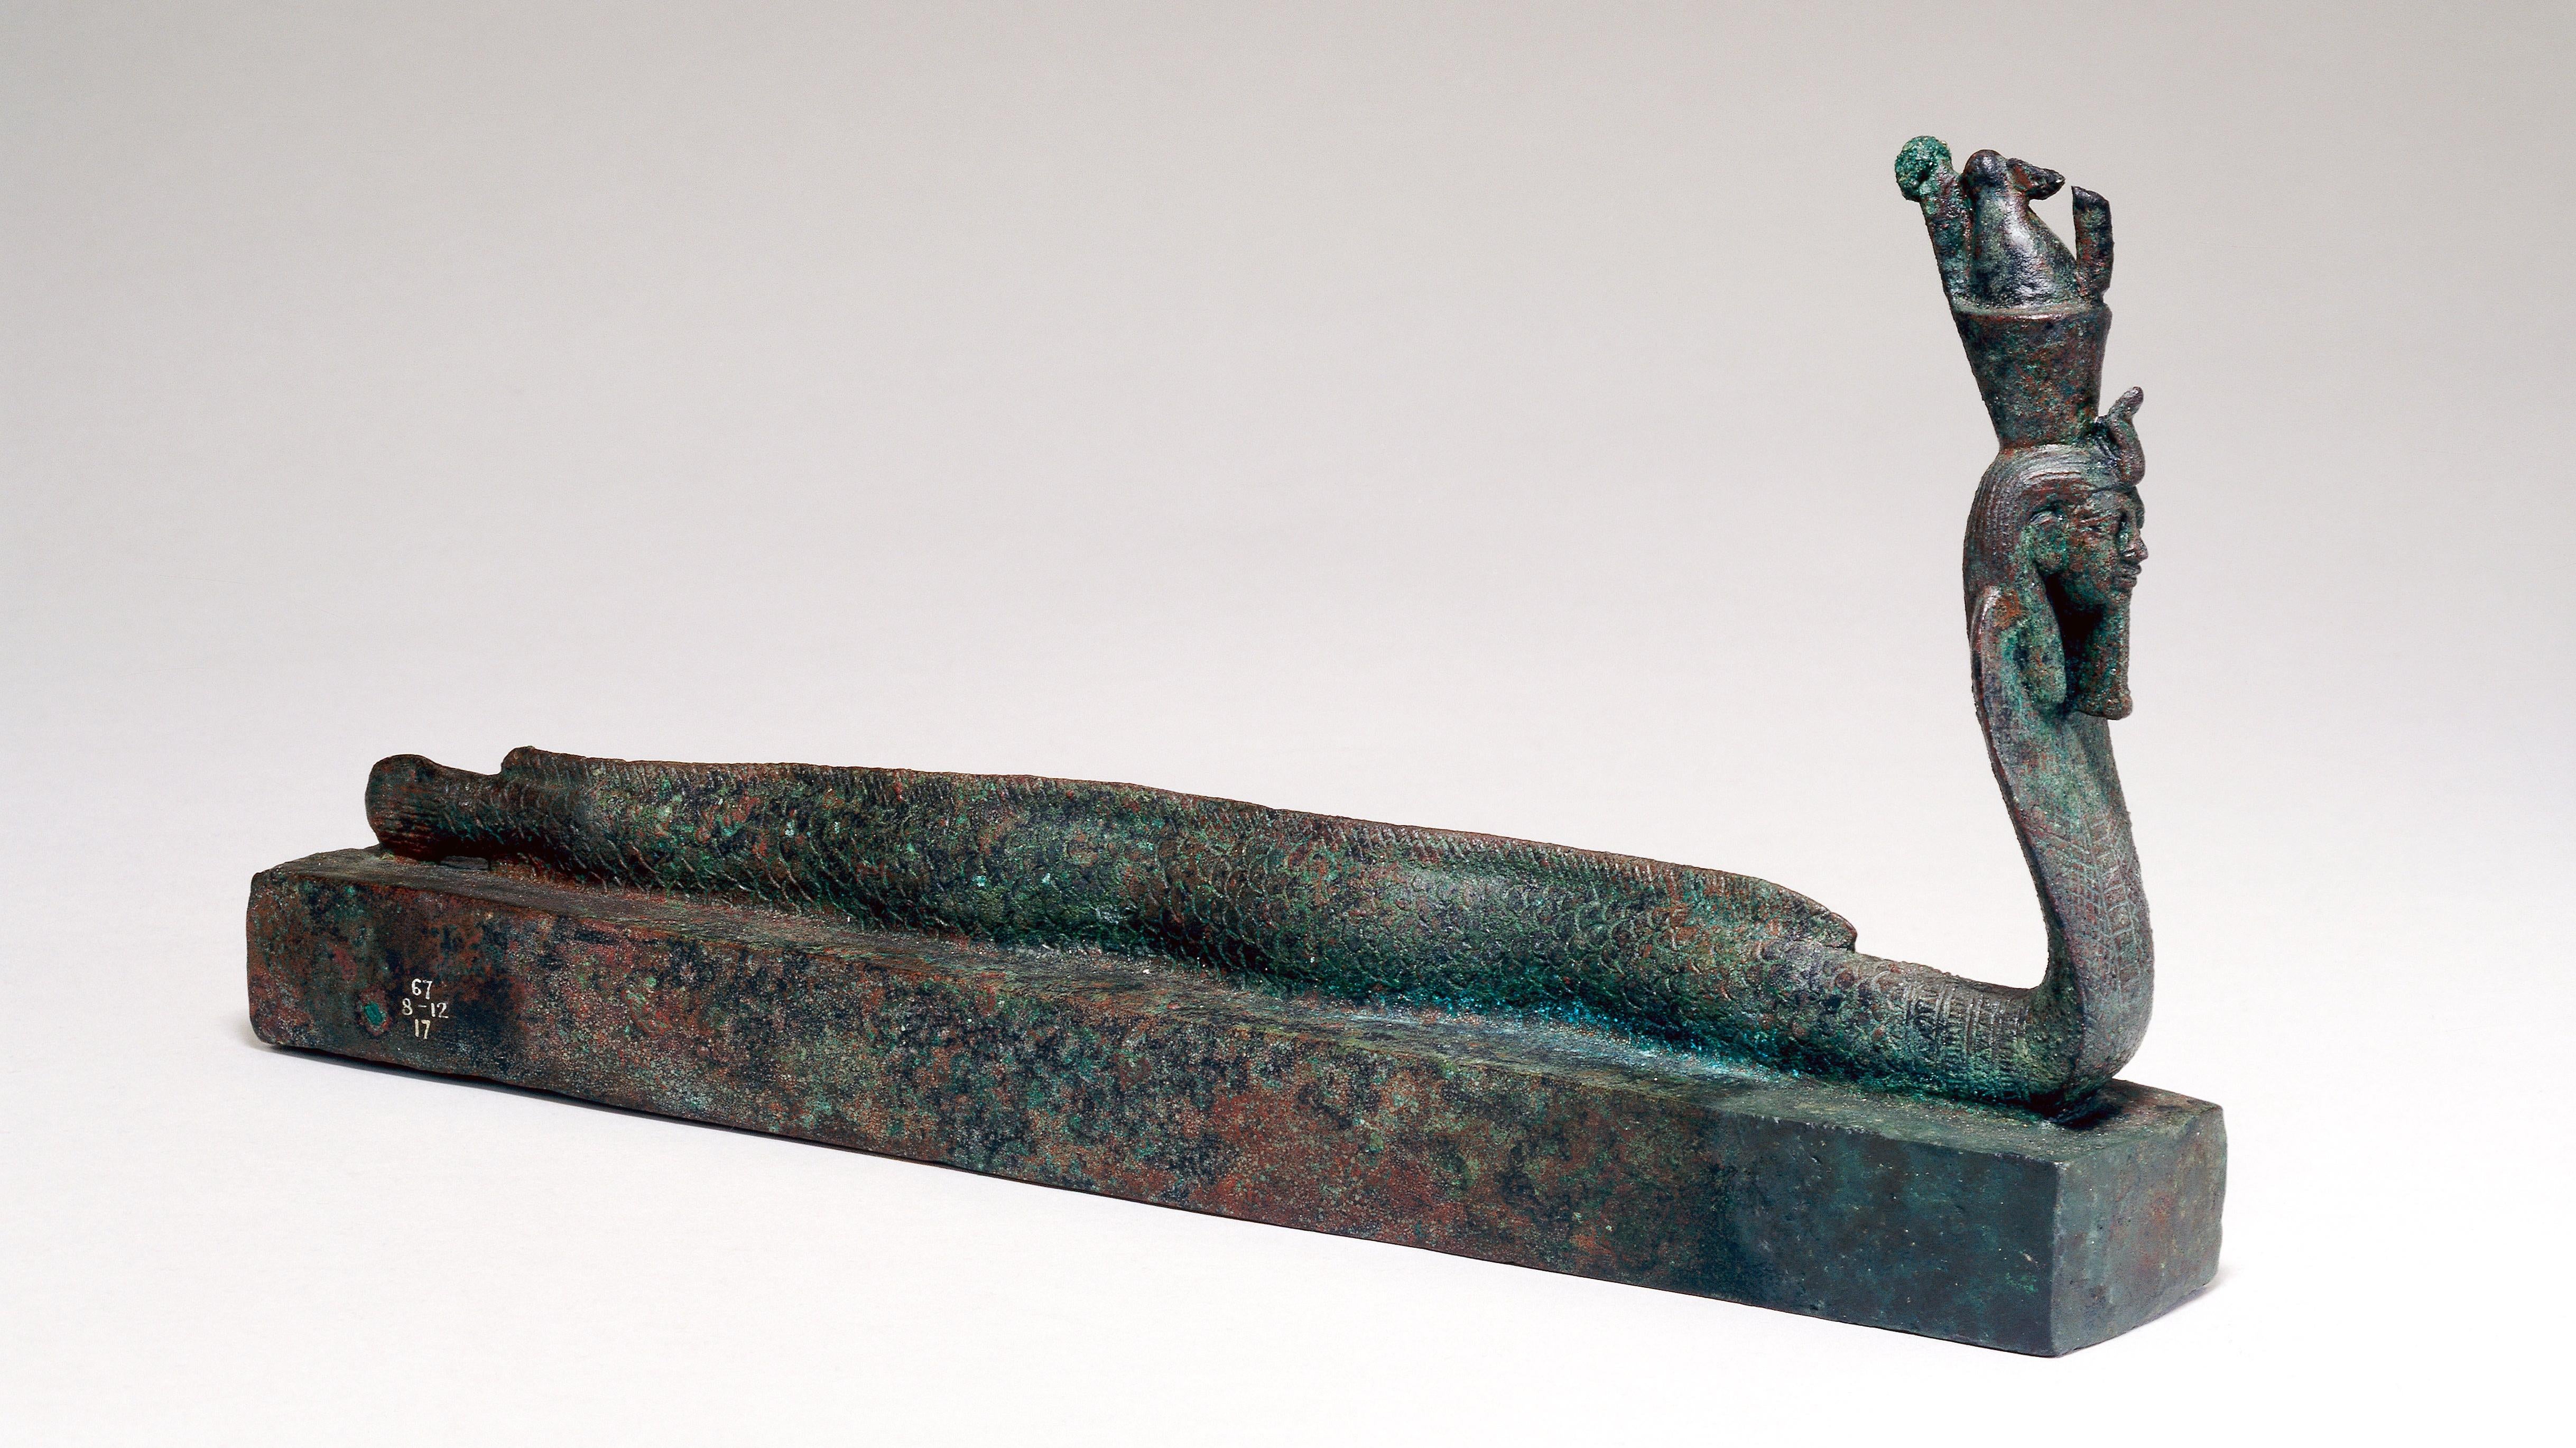 A box topped with a human-headed eel-cobra figure. (Image: The Trustees of the British Museum)